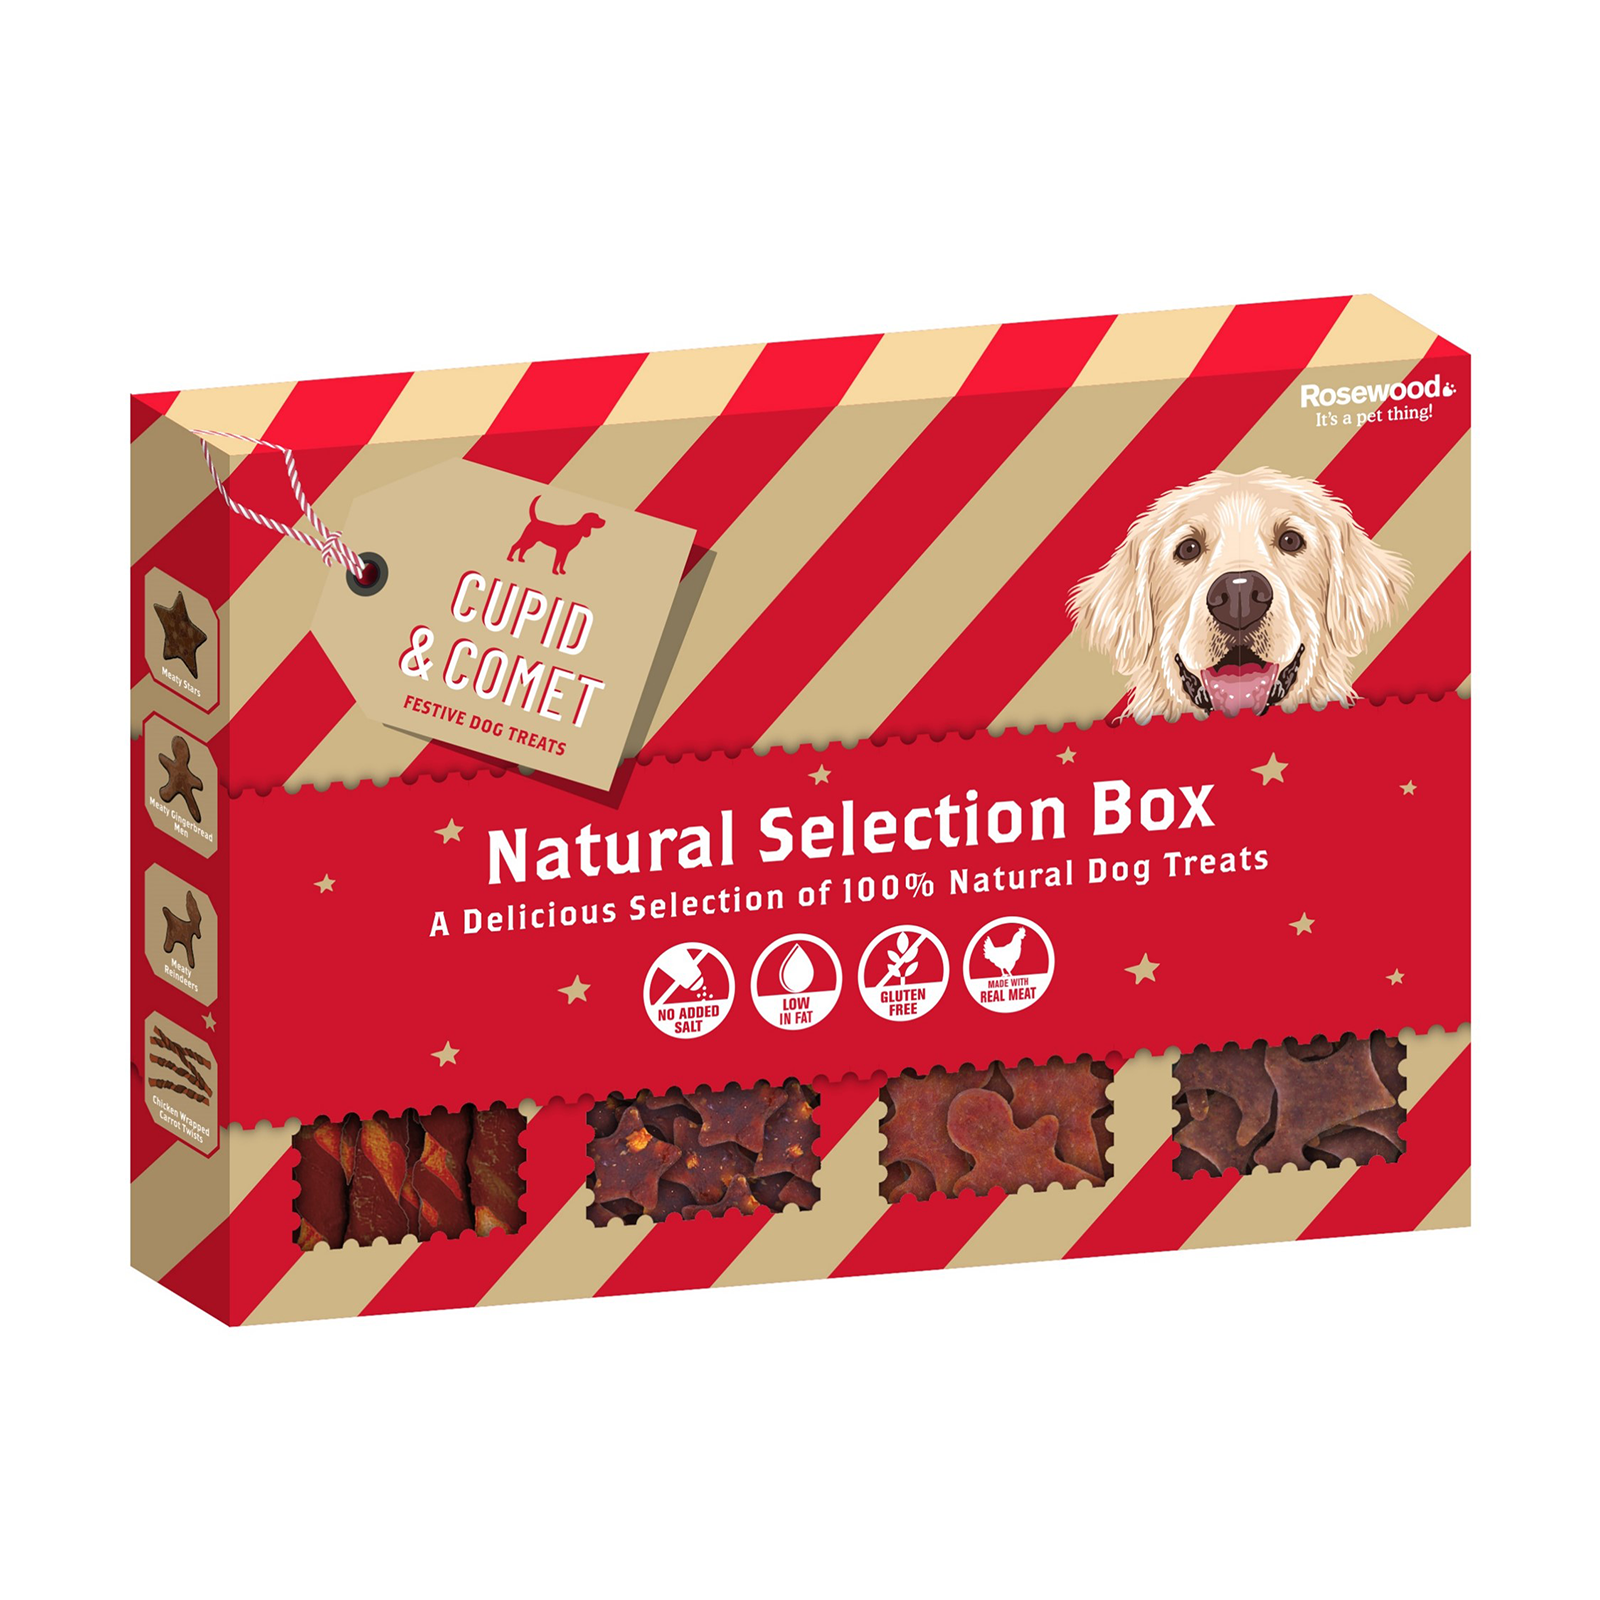 Cupid & Comet Xmas Dog Treat Meaty Biscuit Selection Box